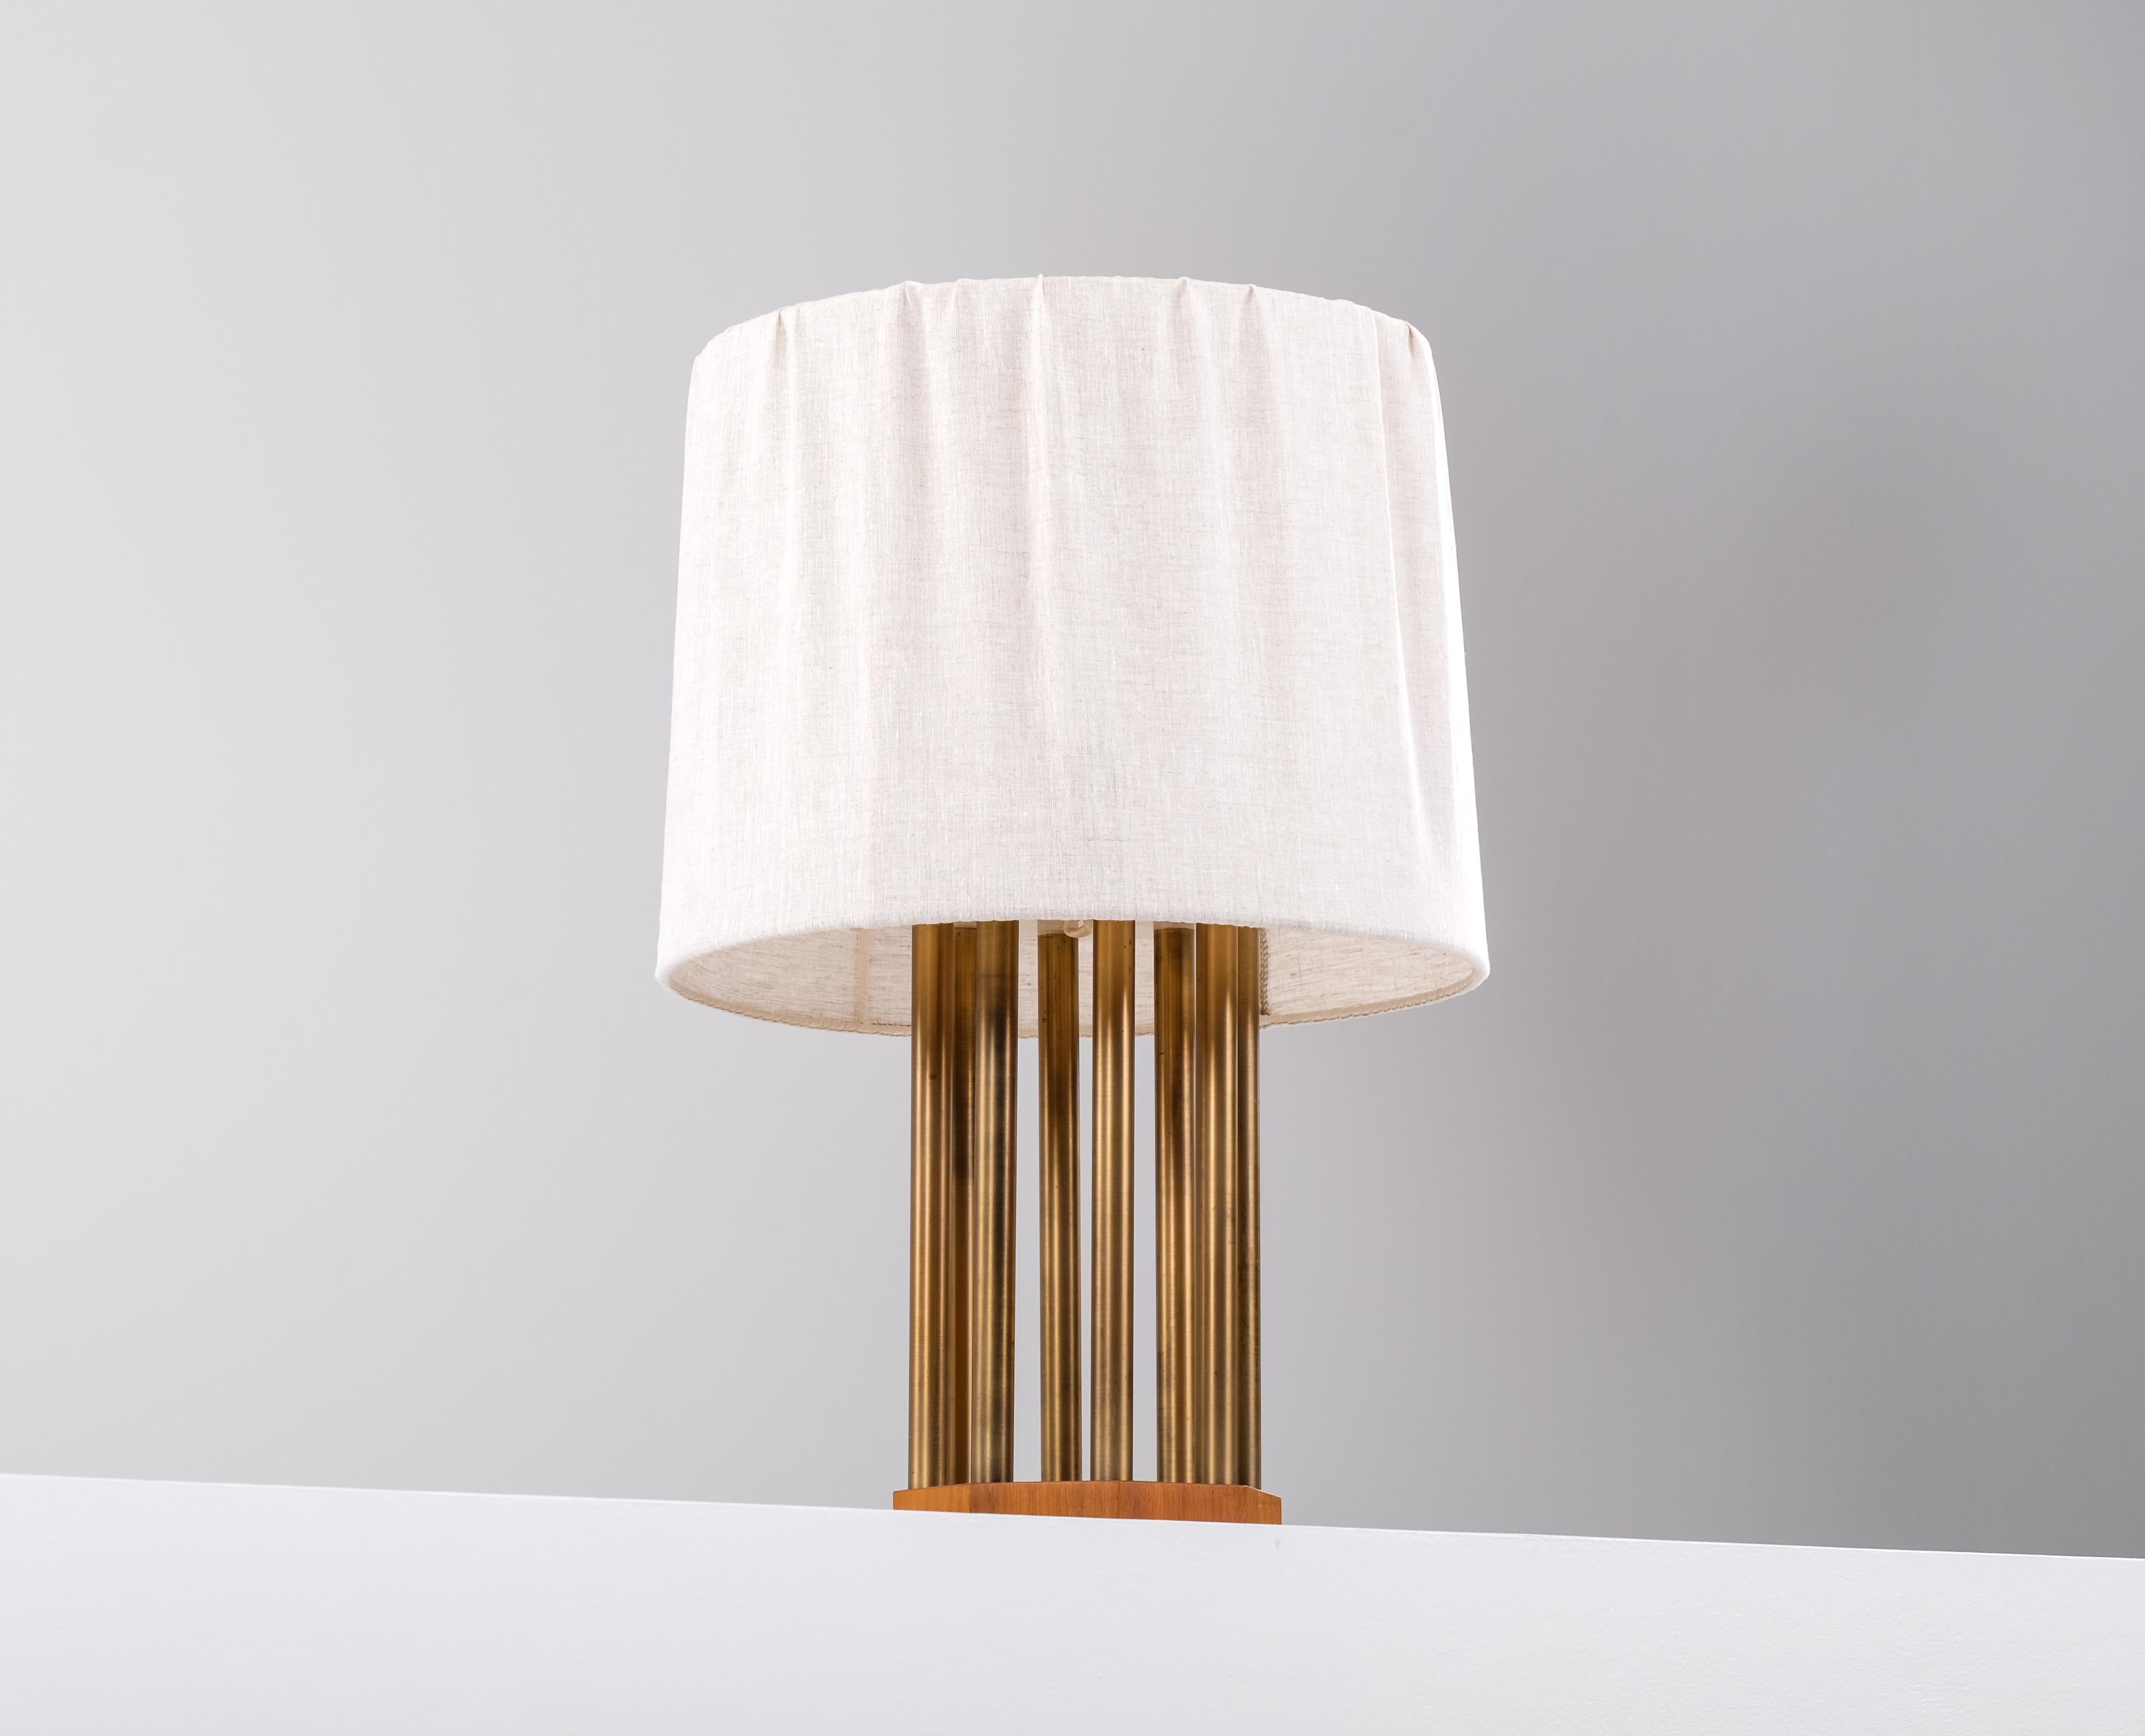 Rare table lamp in brass and teak produced in Sweden, 1950s.
